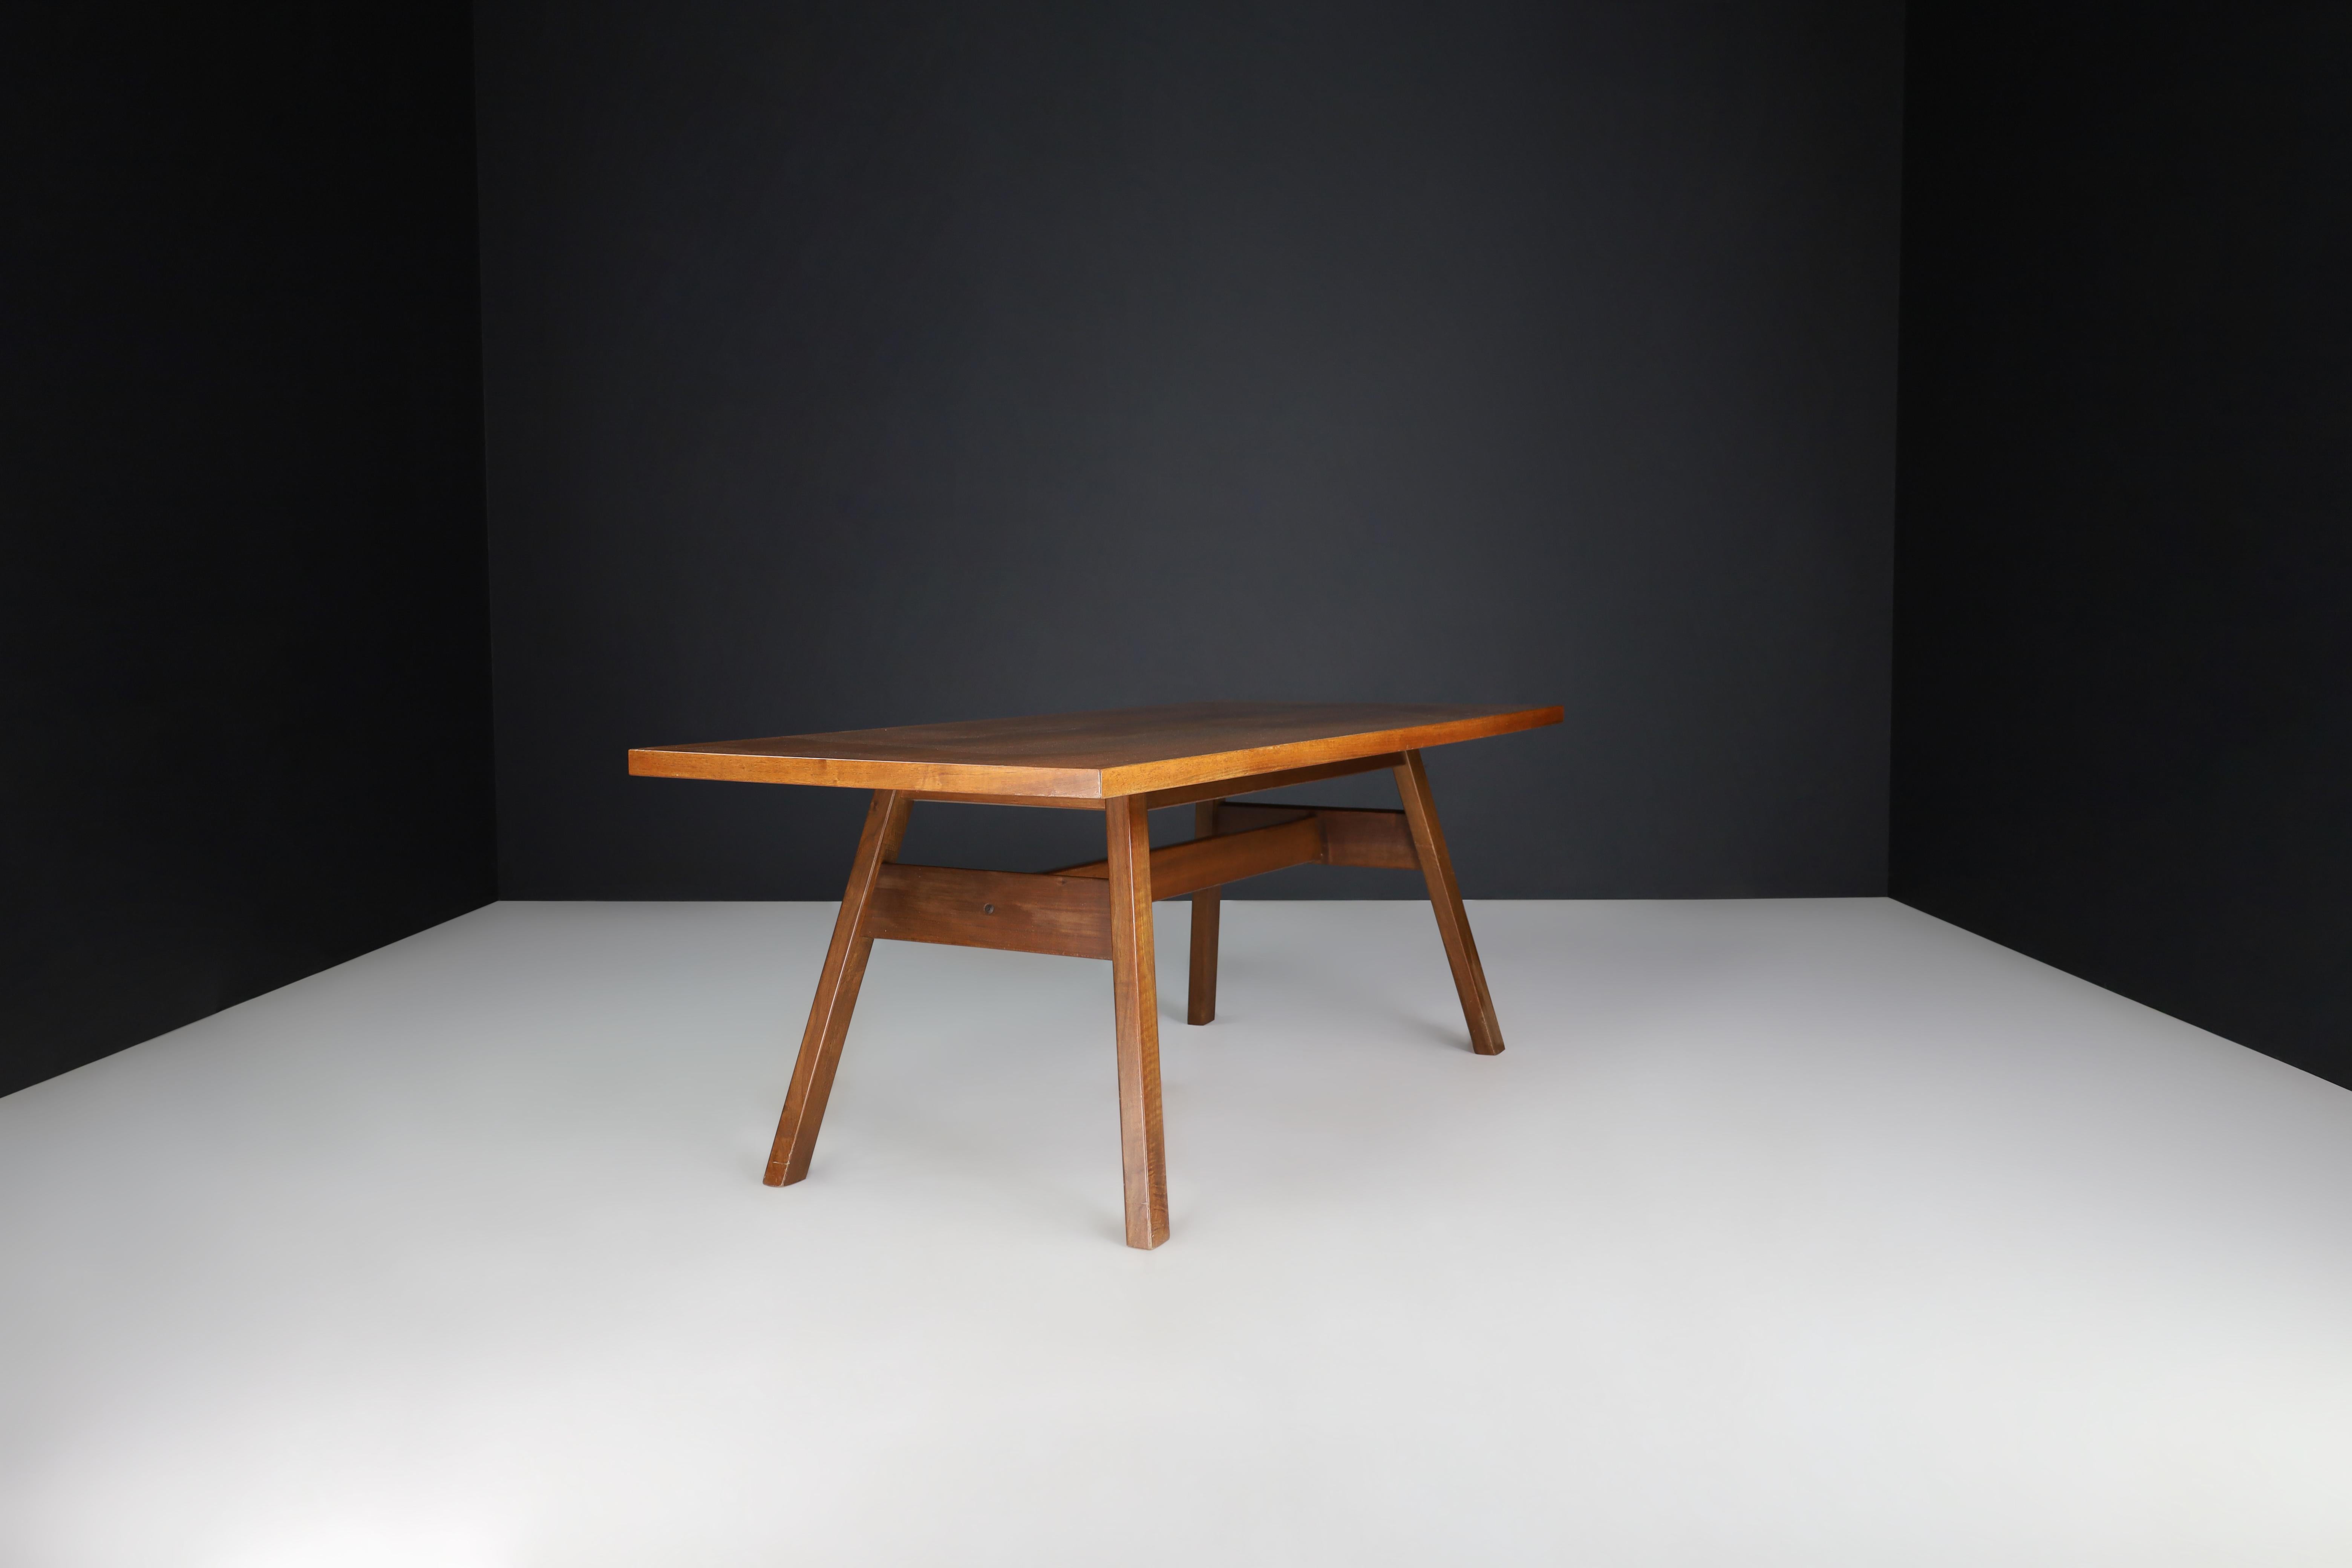 Giovanni Michelucci Walnut Dining Room Table for Poltronova, Italy, 1964 For Sale 2